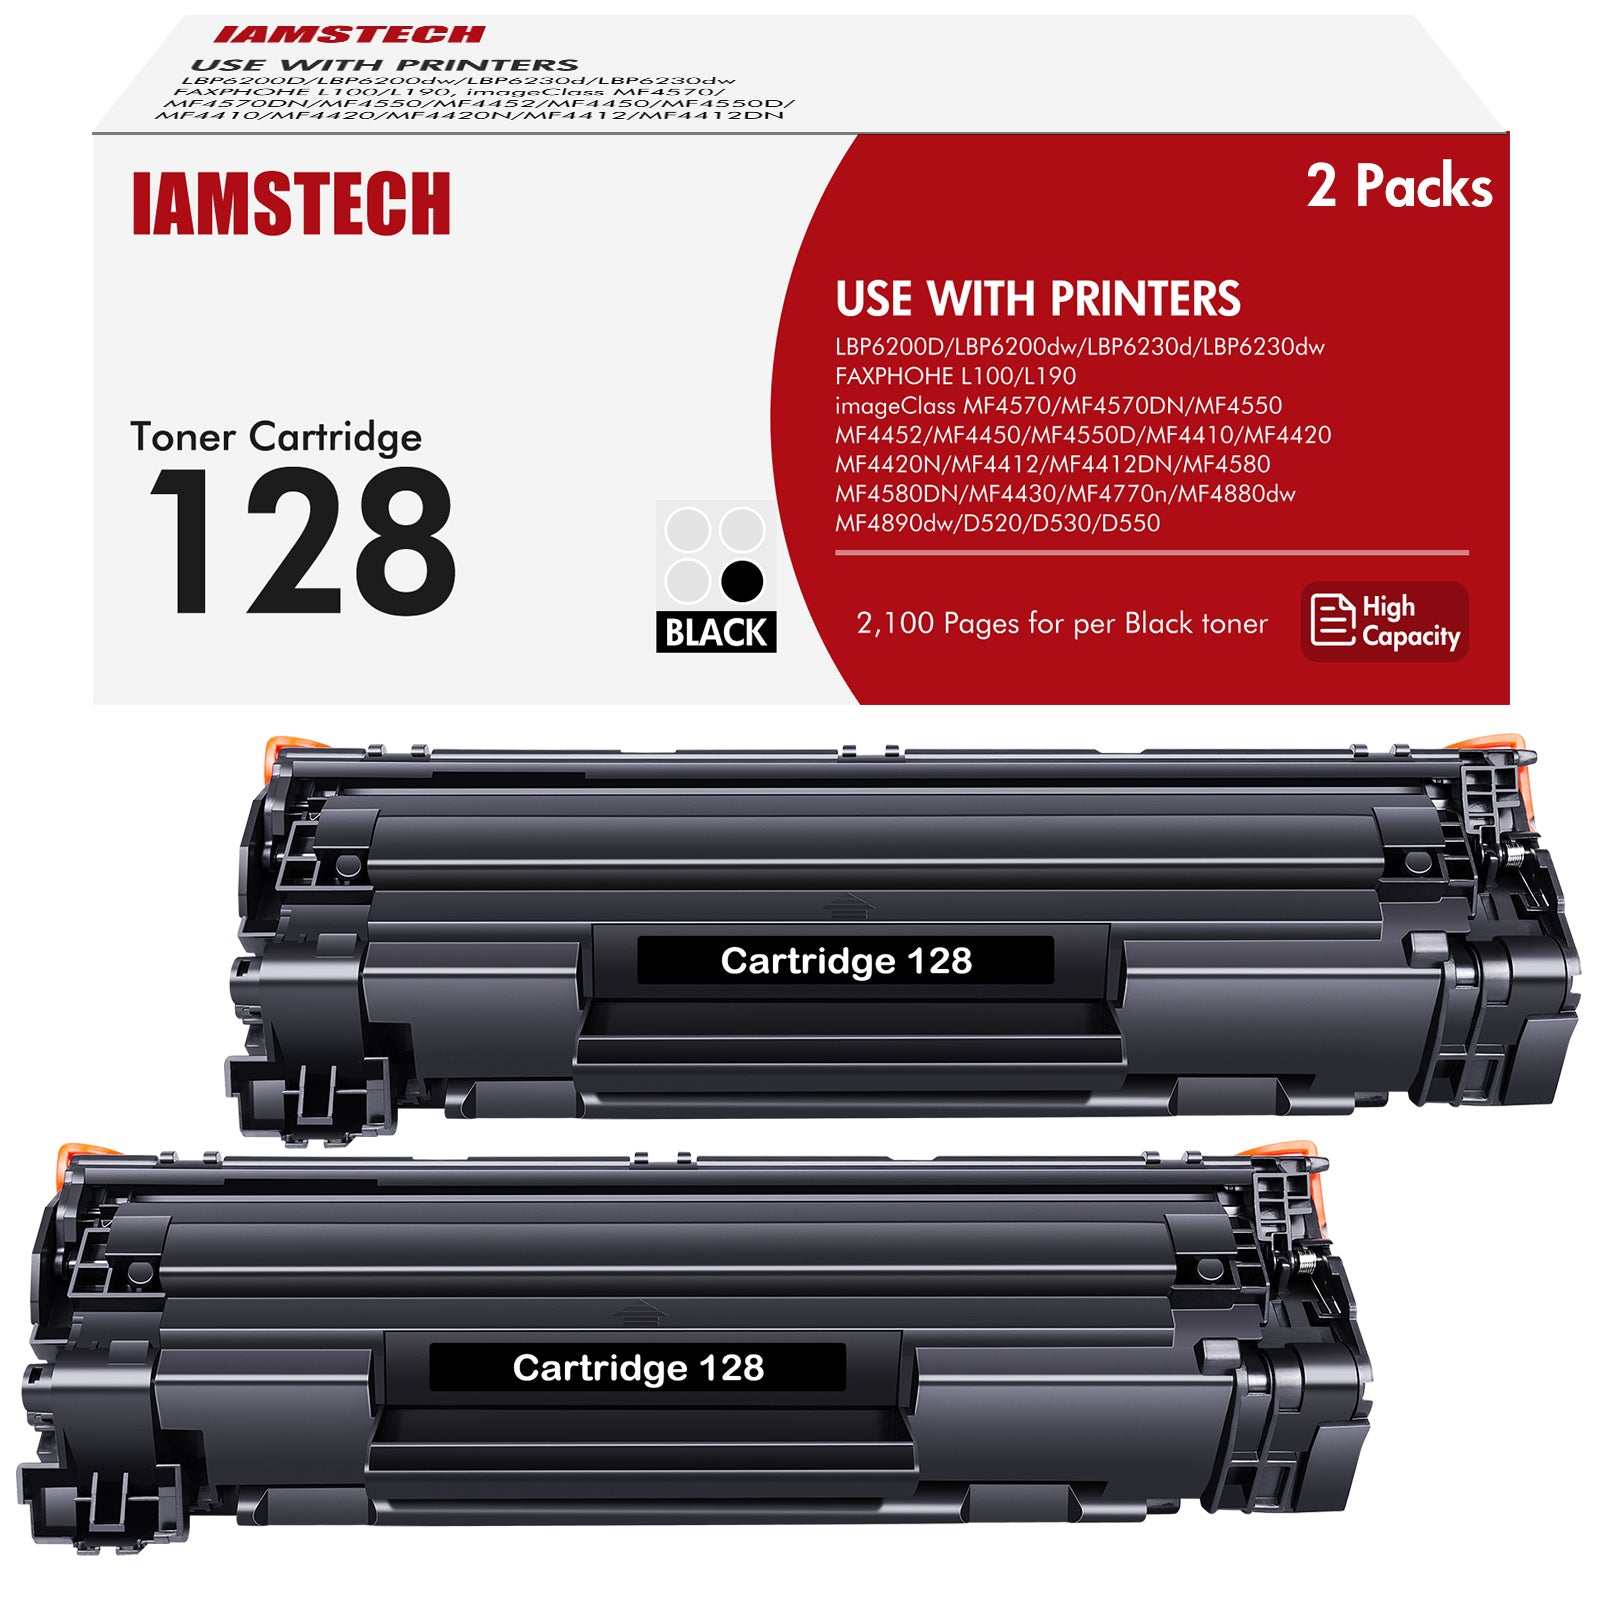 Amstech Compatible Toner Cartridge Replacement for Canon 128 CRG128, Black, 2 Pack